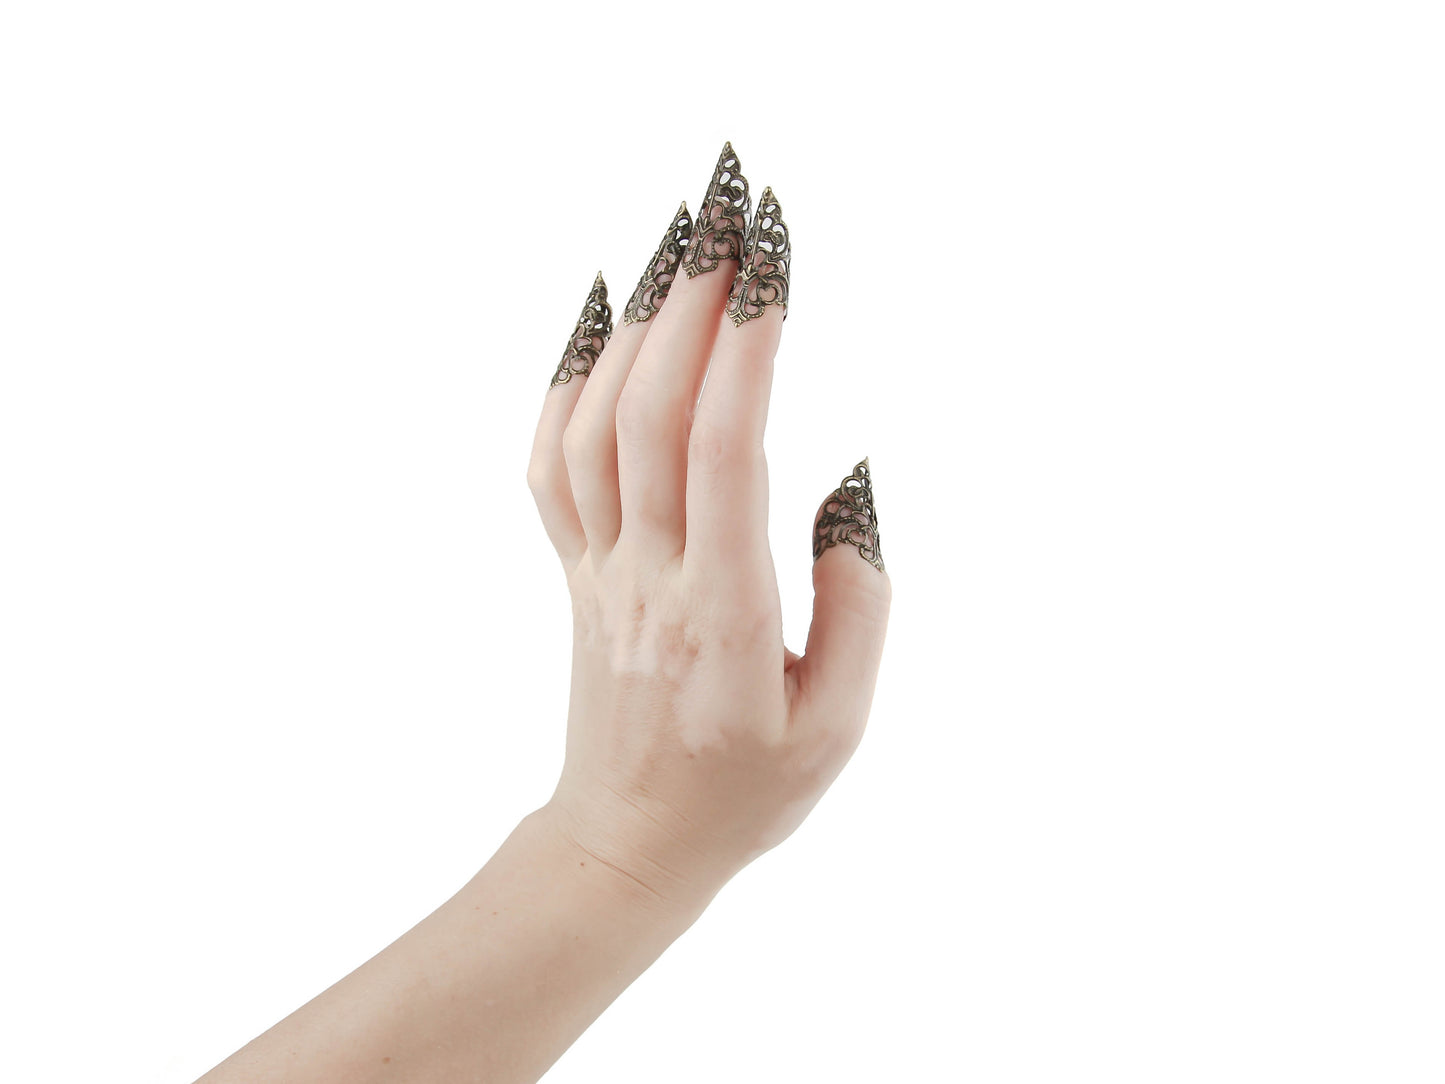 Striking goth nail rings in bronze, also known as claws, from Myril Jewels, showcasing the essence of dark avant-garde fashion. These neo-gothic jewels are perfect for adding a bold touch to Halloween costumes, punk styles, or everyday wear for those with a whimsigoth or witchcore aesthetic.